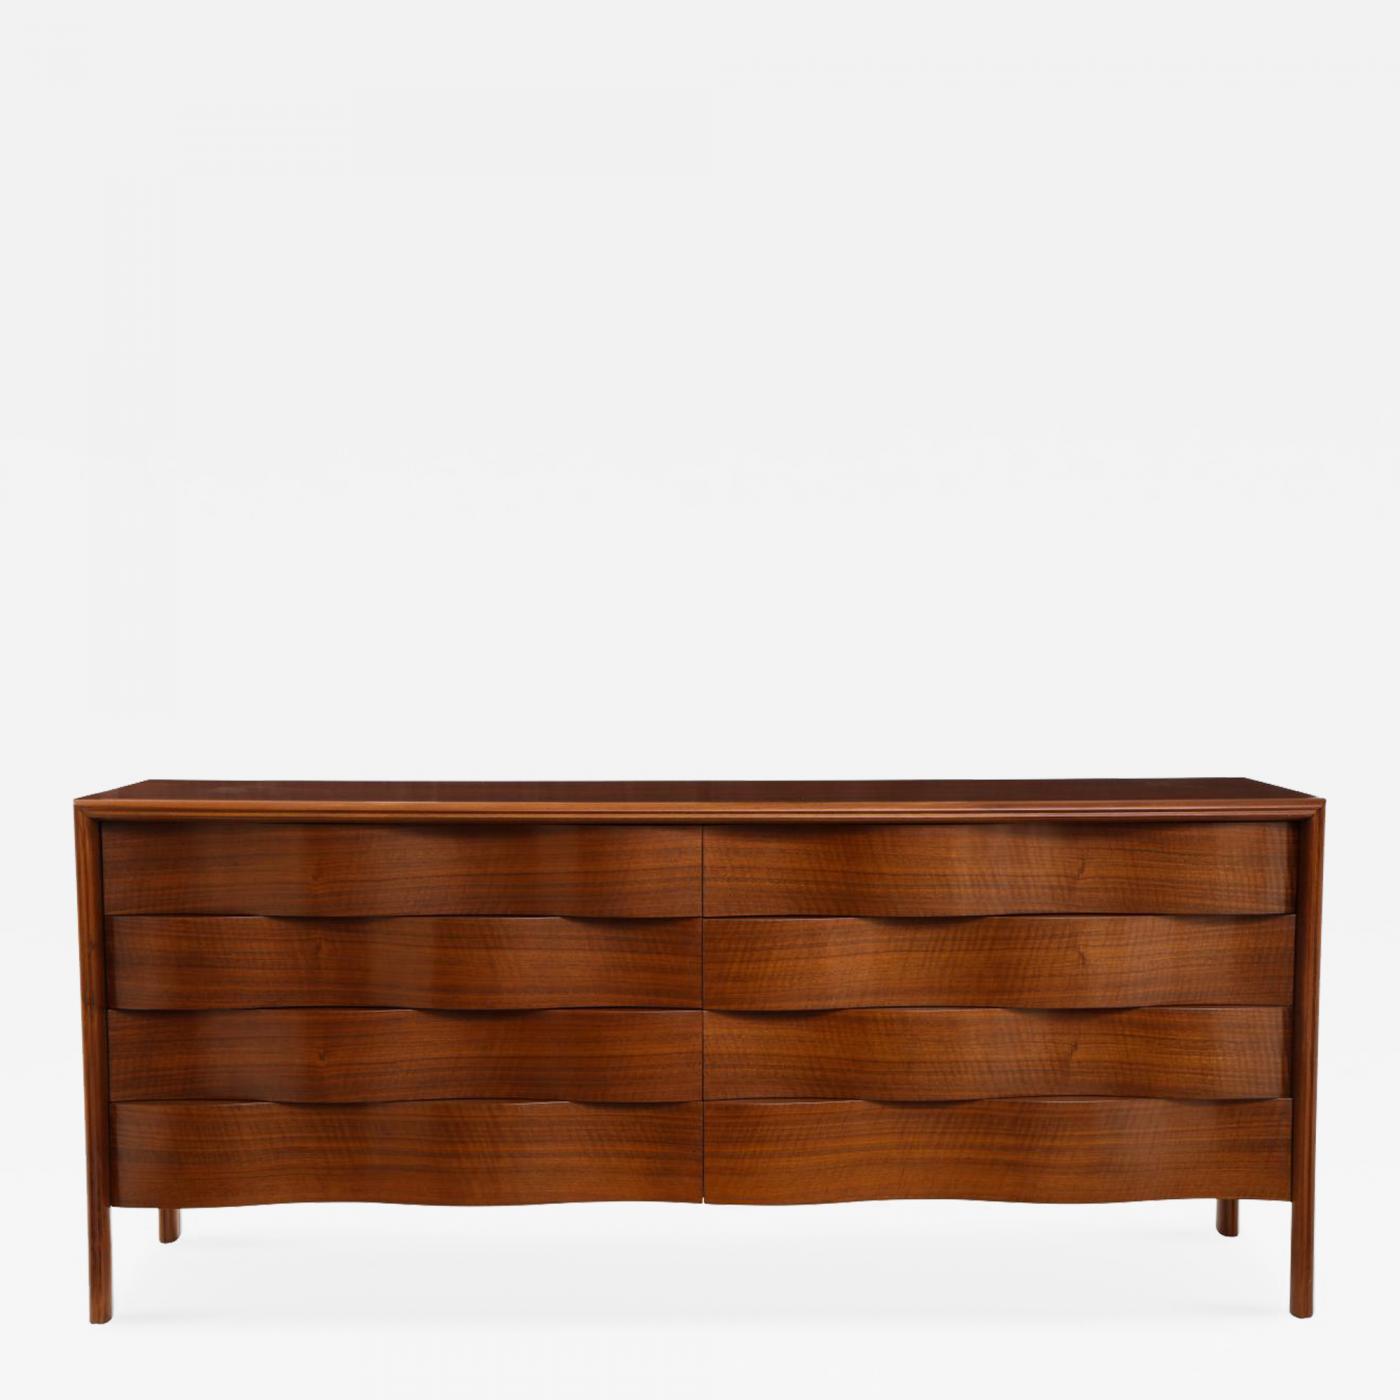  A long chest with eight drawers, Edmond Spence, Sweden, 1950.